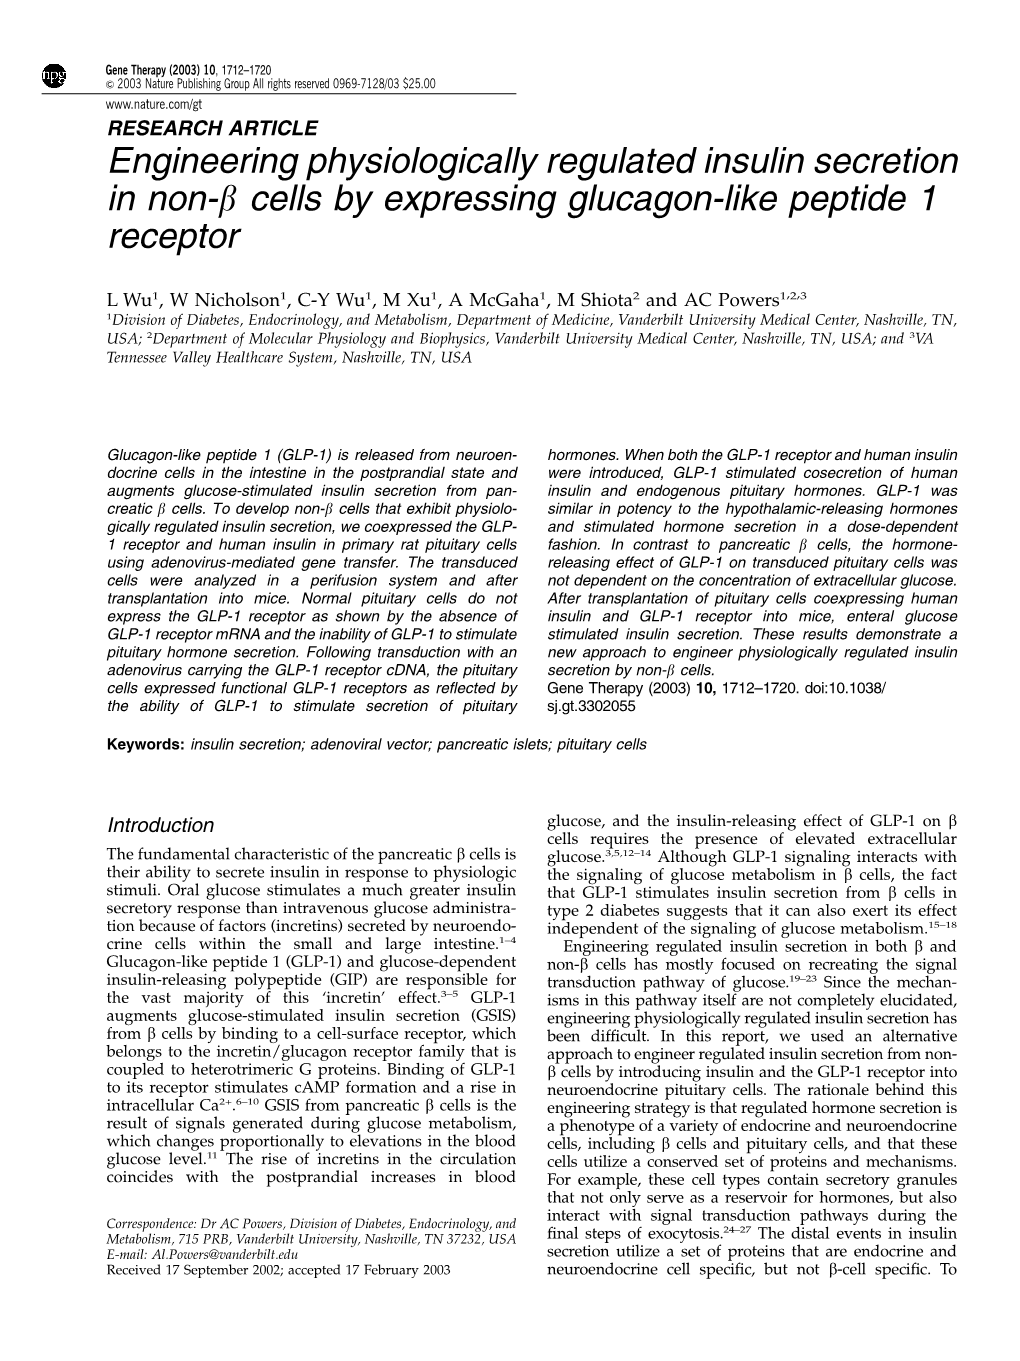 Engineering Physiologically Regulated Insulin Secretion in Non-Β Cells by Expressing Glucagon-Like Peptide 1 Receptor